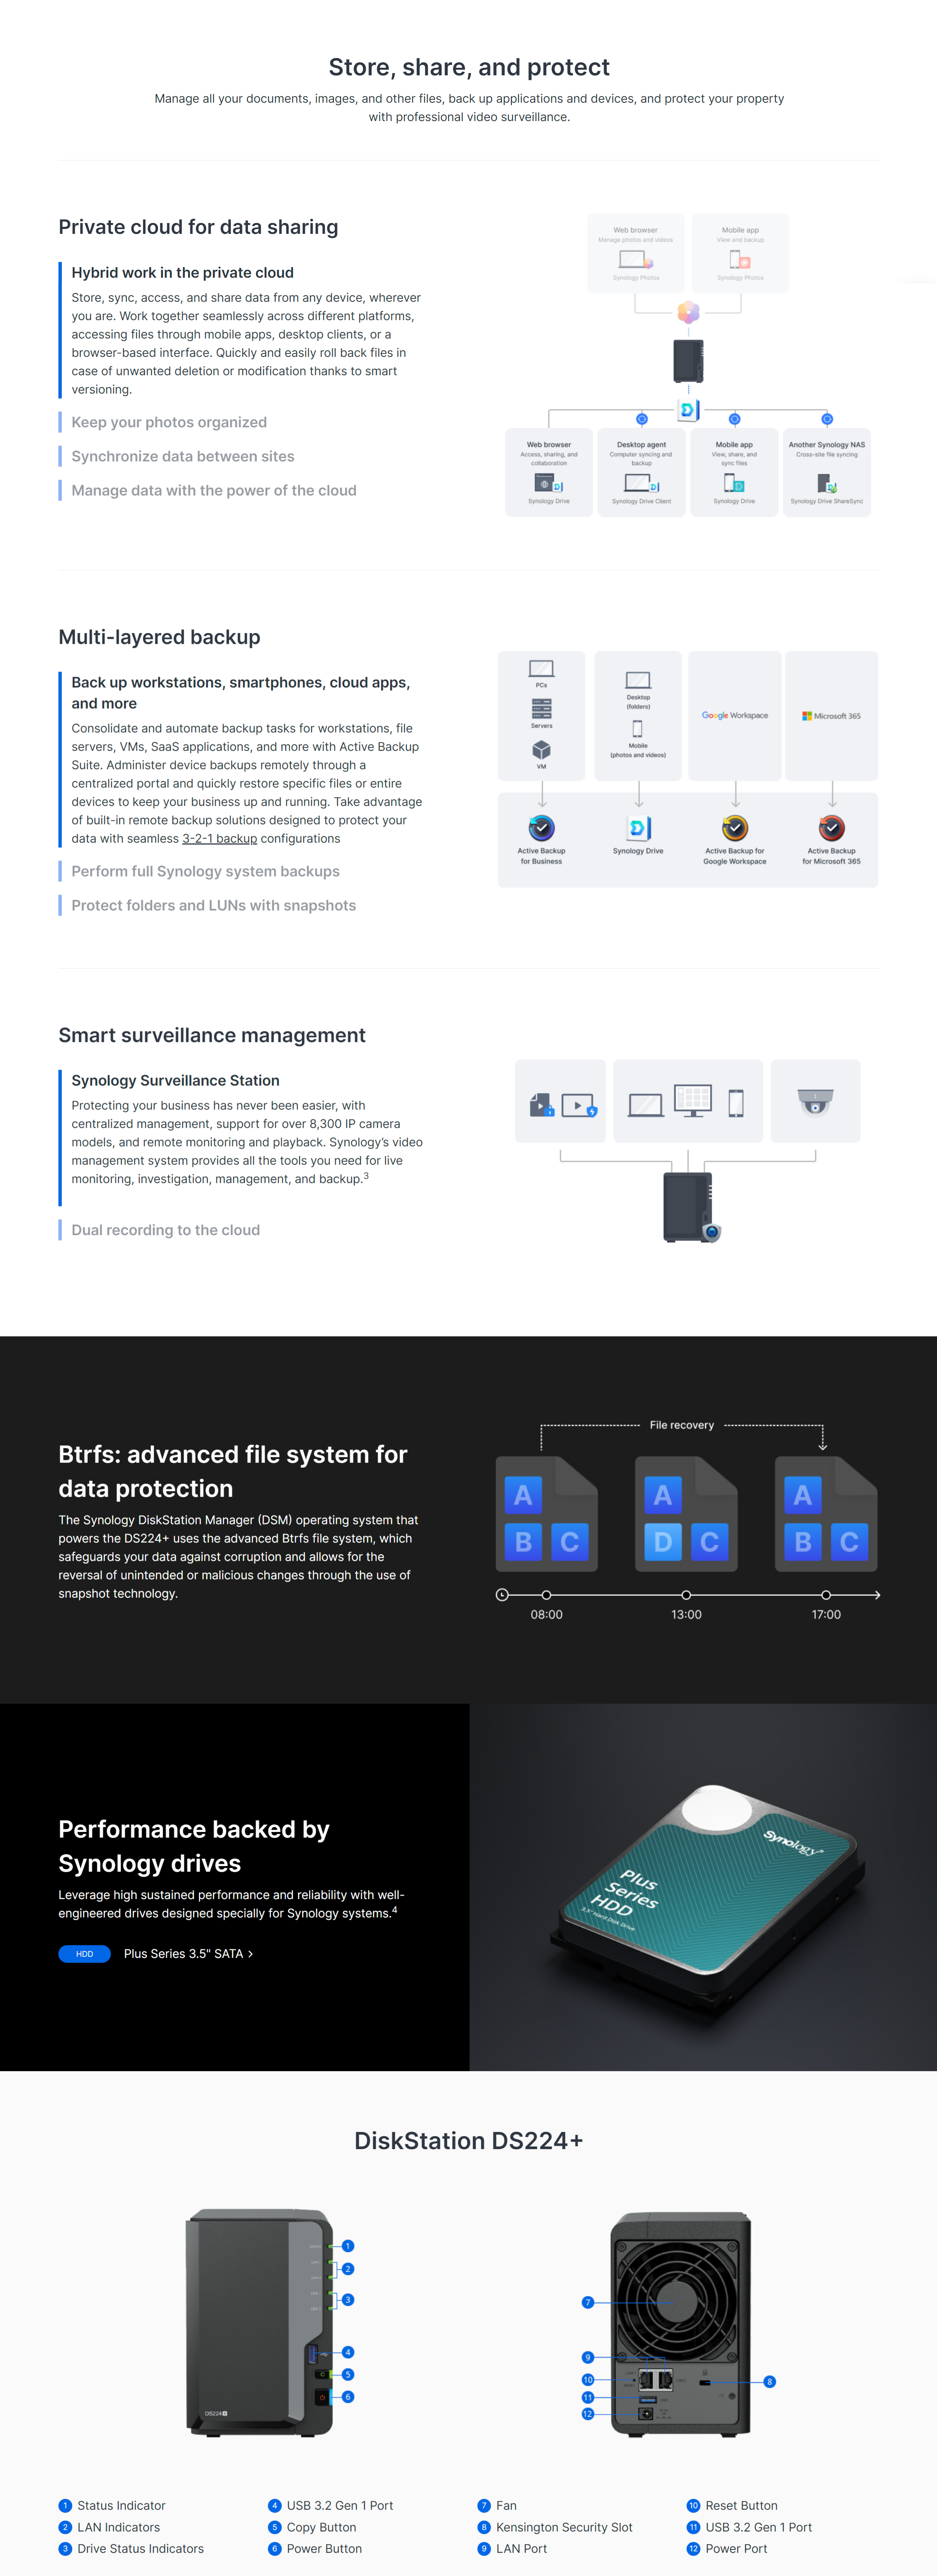 A large marketing image providing additional information about the product Synology DiskStation DS224+ Intel Celeron 4-core 2.0GHz 2-Bay Diskless NAS Enclsoure - Additional alt info not provided